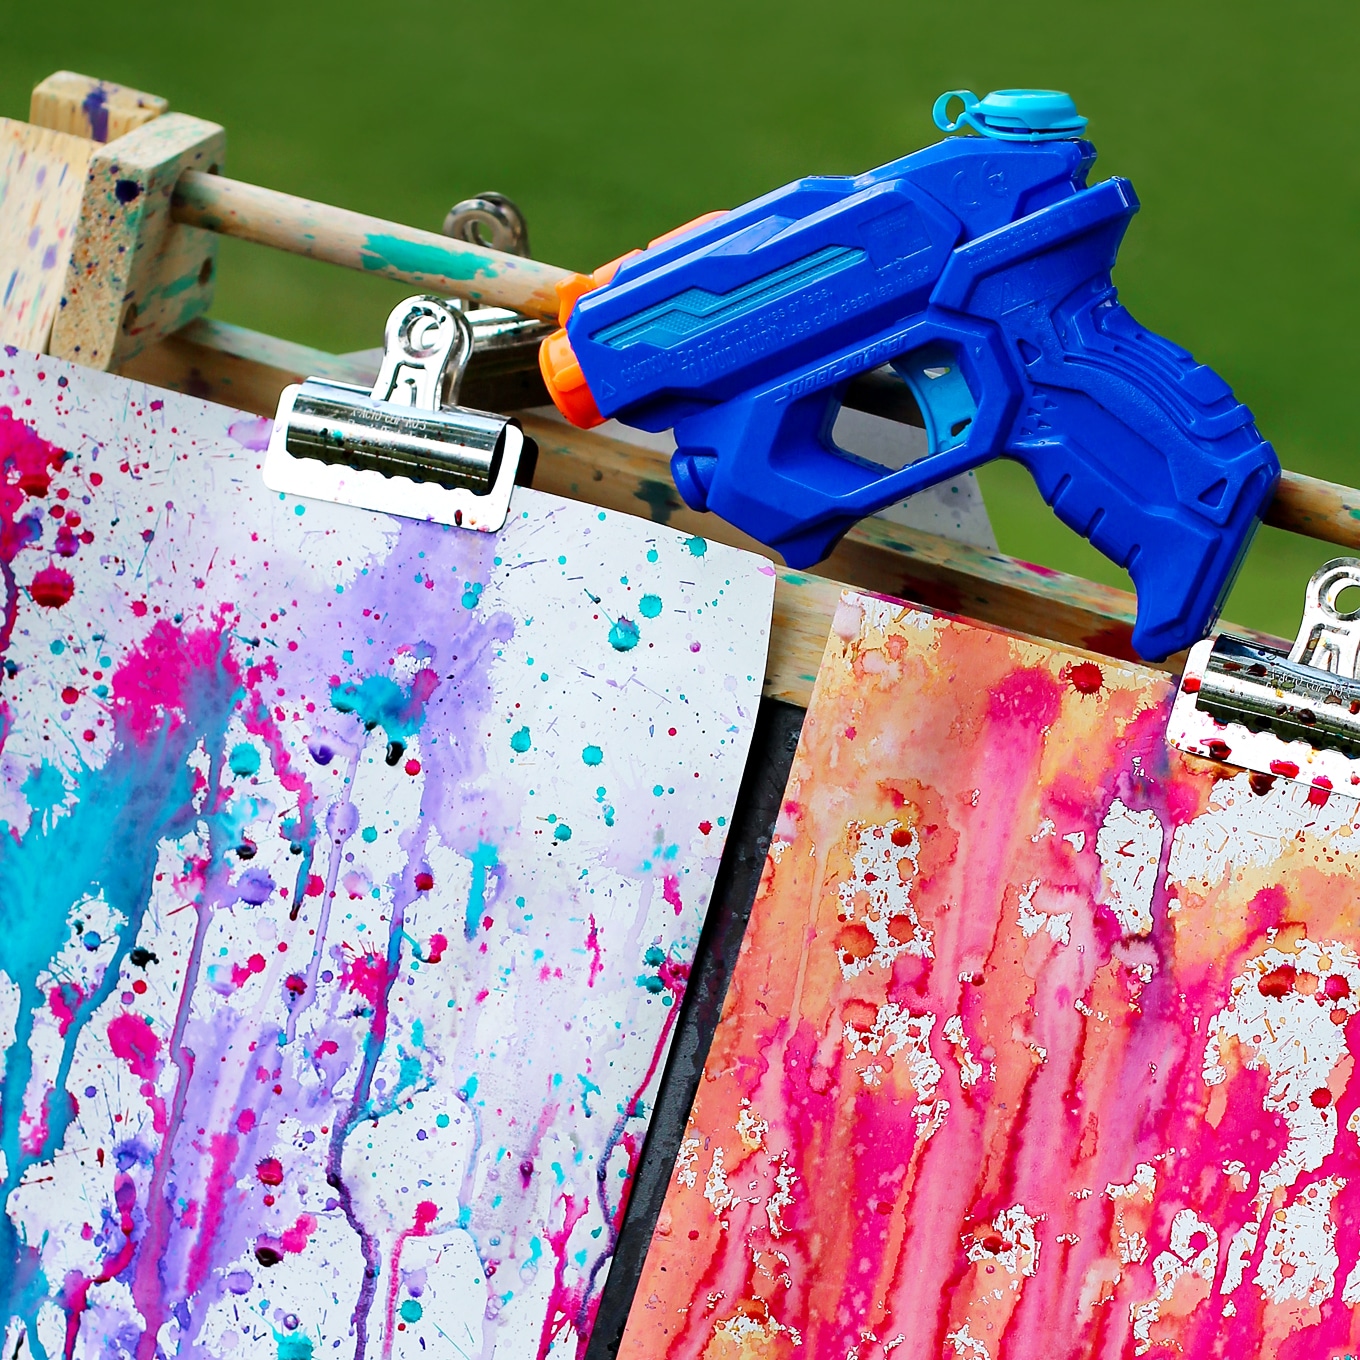 Painting With Squirt Gun Arts and Crafts